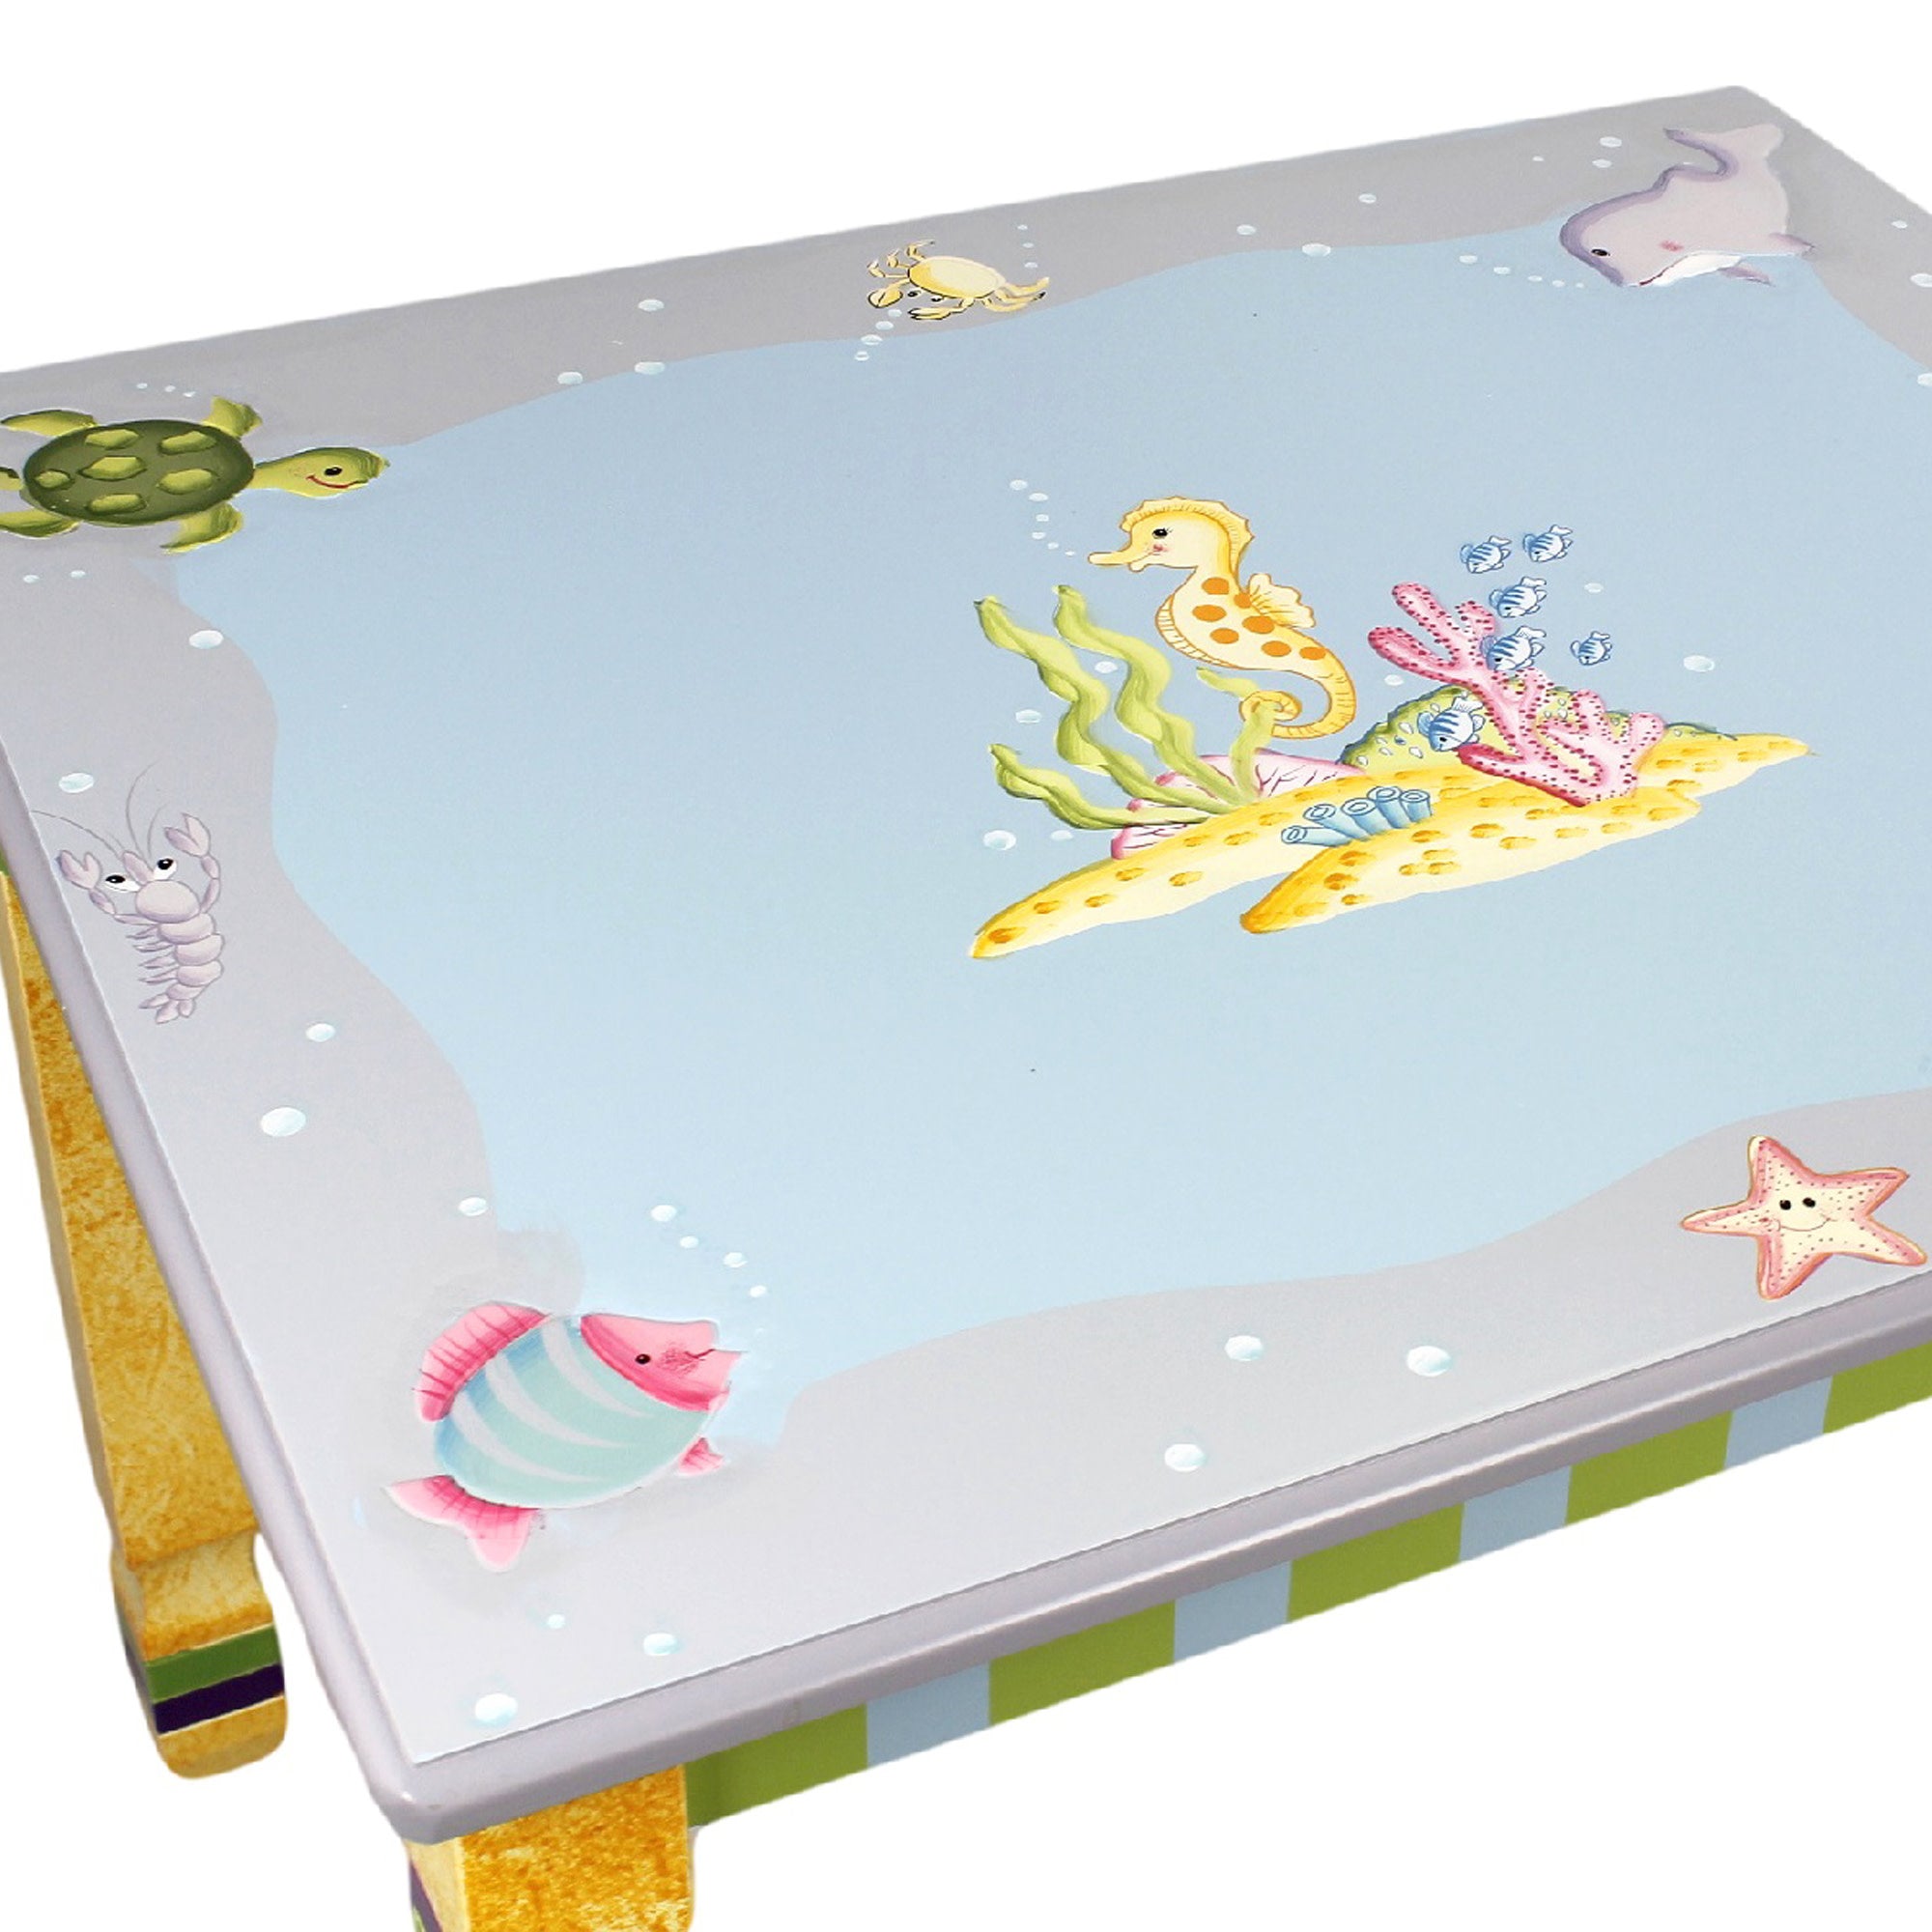 Fantasy Fields Toy Furniture Under the Sea Table with Hand-Carved Distressed Sponge Finish Legs, Striped Apron, & Hand-Painted Sea Creature Top, Blue/Yellow